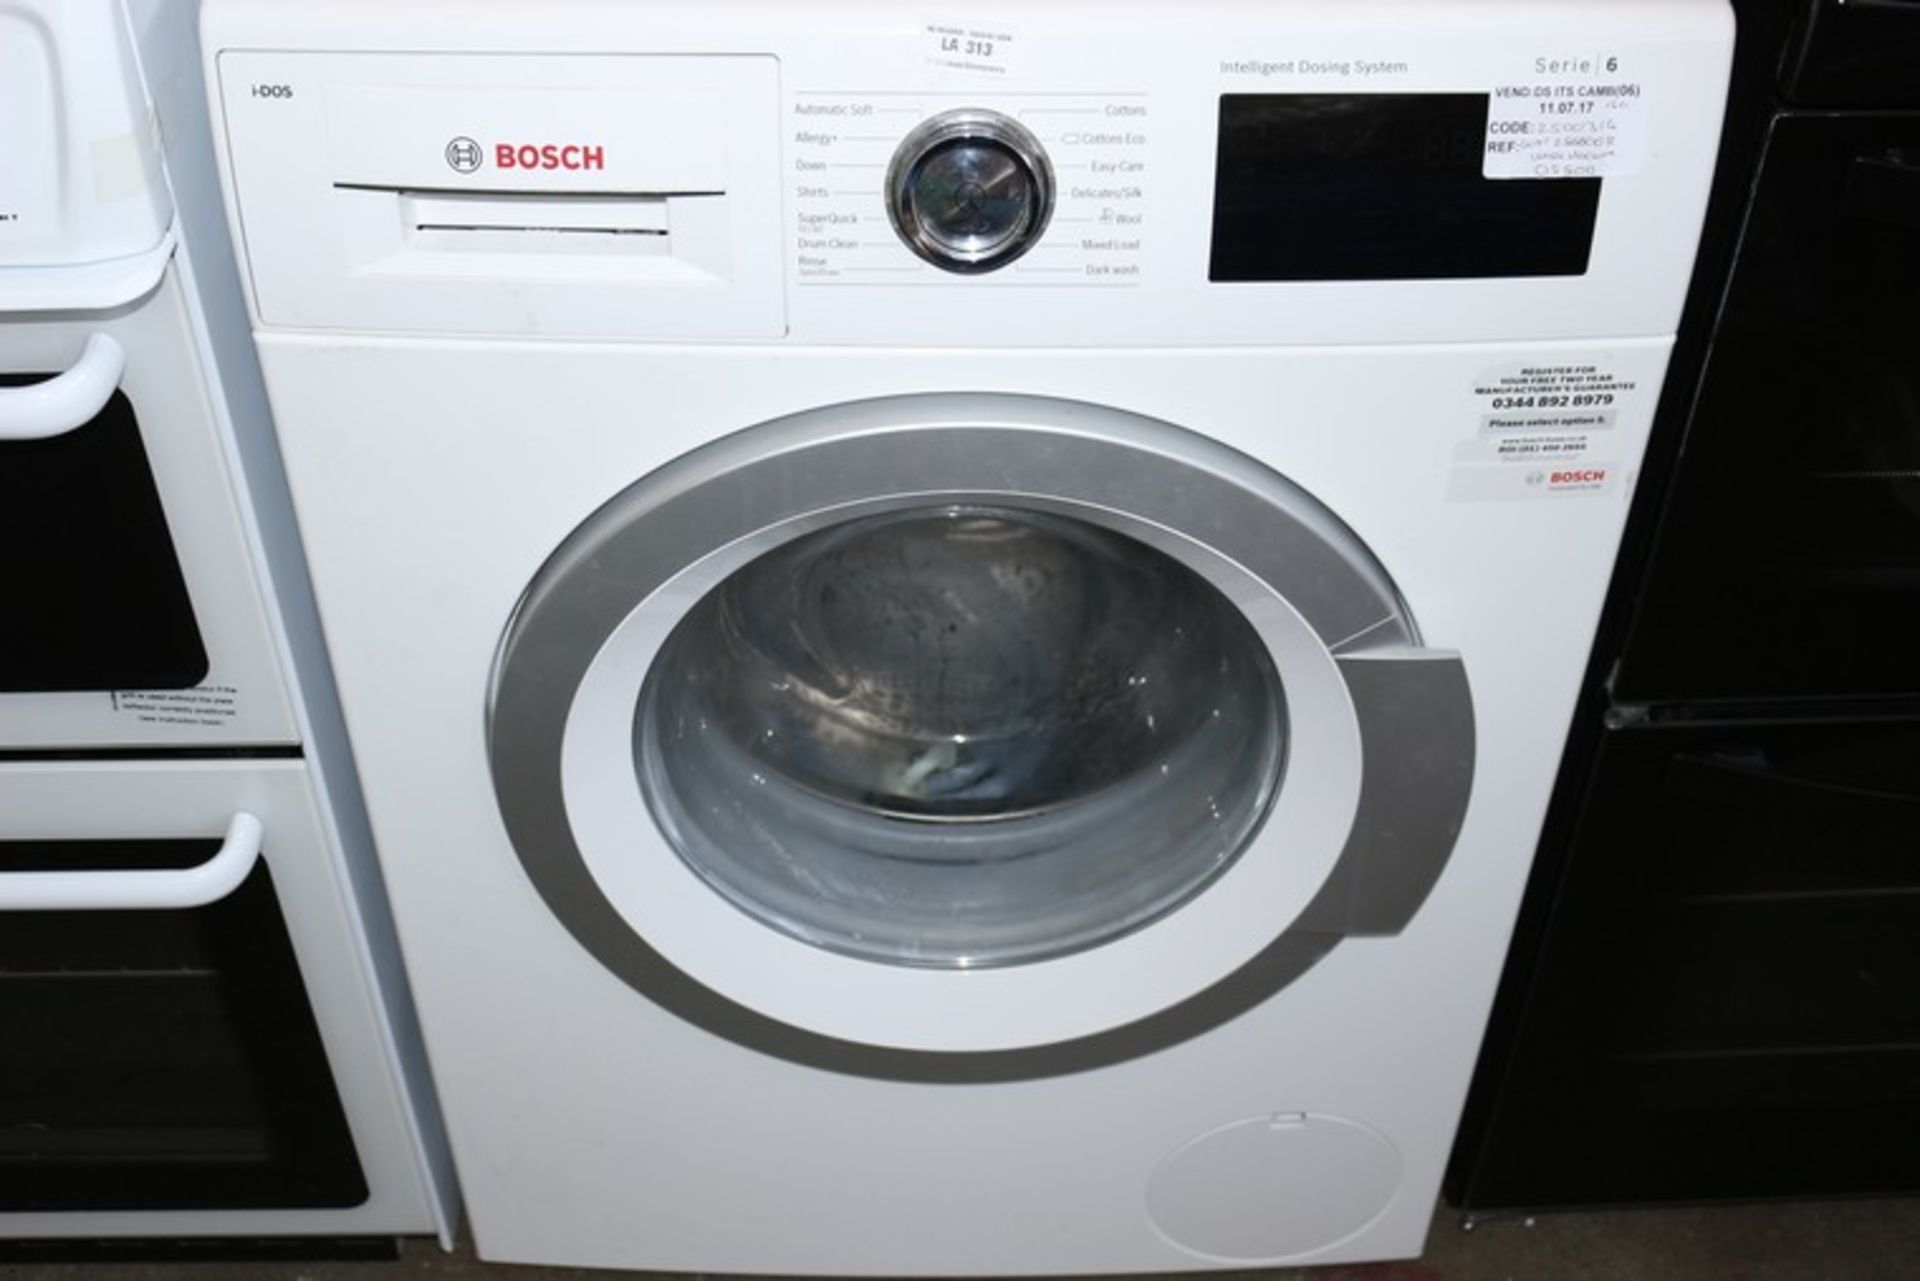 1 x BOSCH WAT28660GB WASHING MACHINE IN WHITE RRP £550 (2500314)(11.7.17) *PLEASE NOTE THAT THE